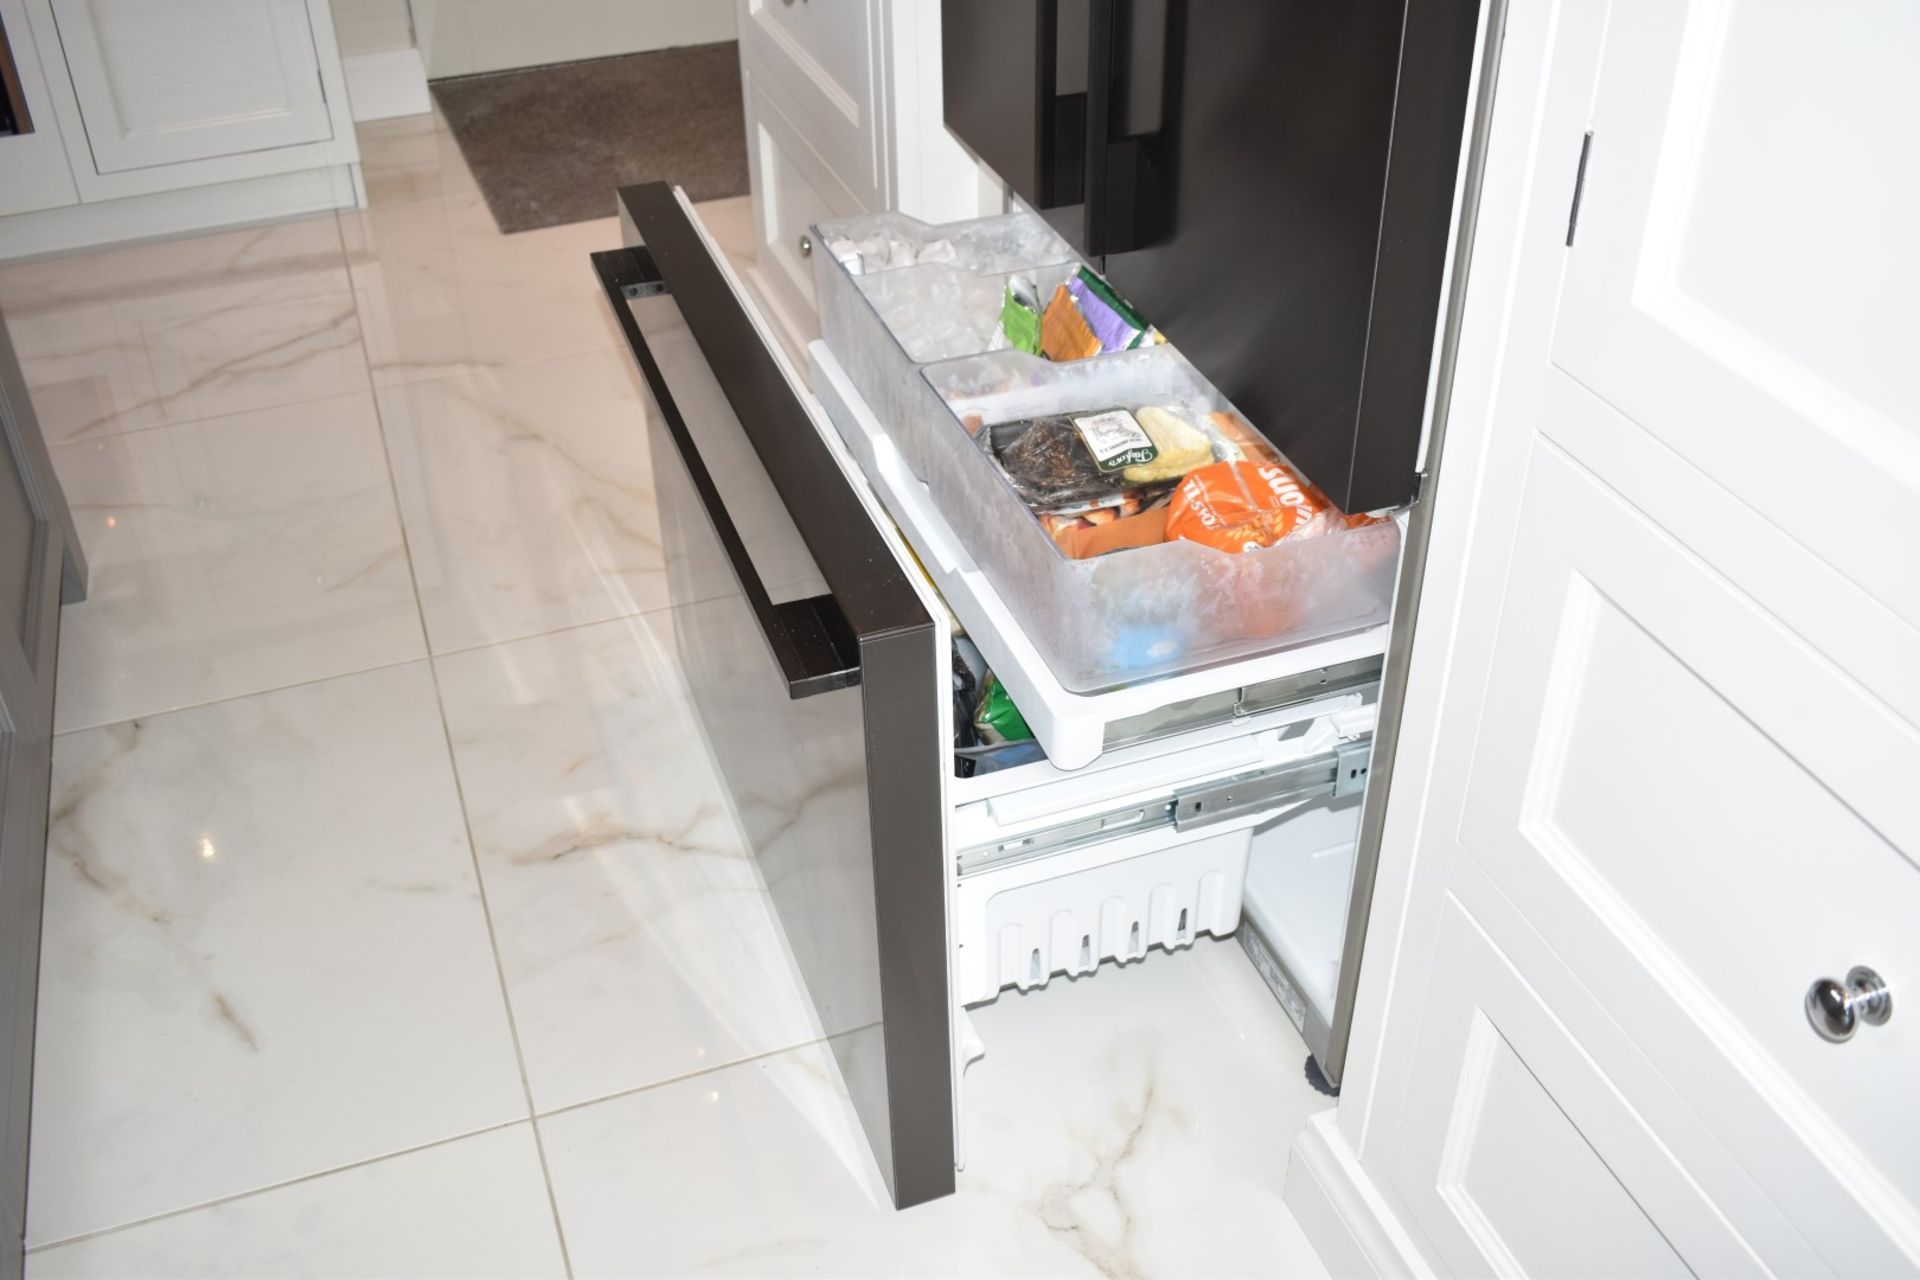 1 x Fisher & Paykel Goliath American Style Fridge Freezer With Ice and Water Dispenser - Model - Image 3 of 10